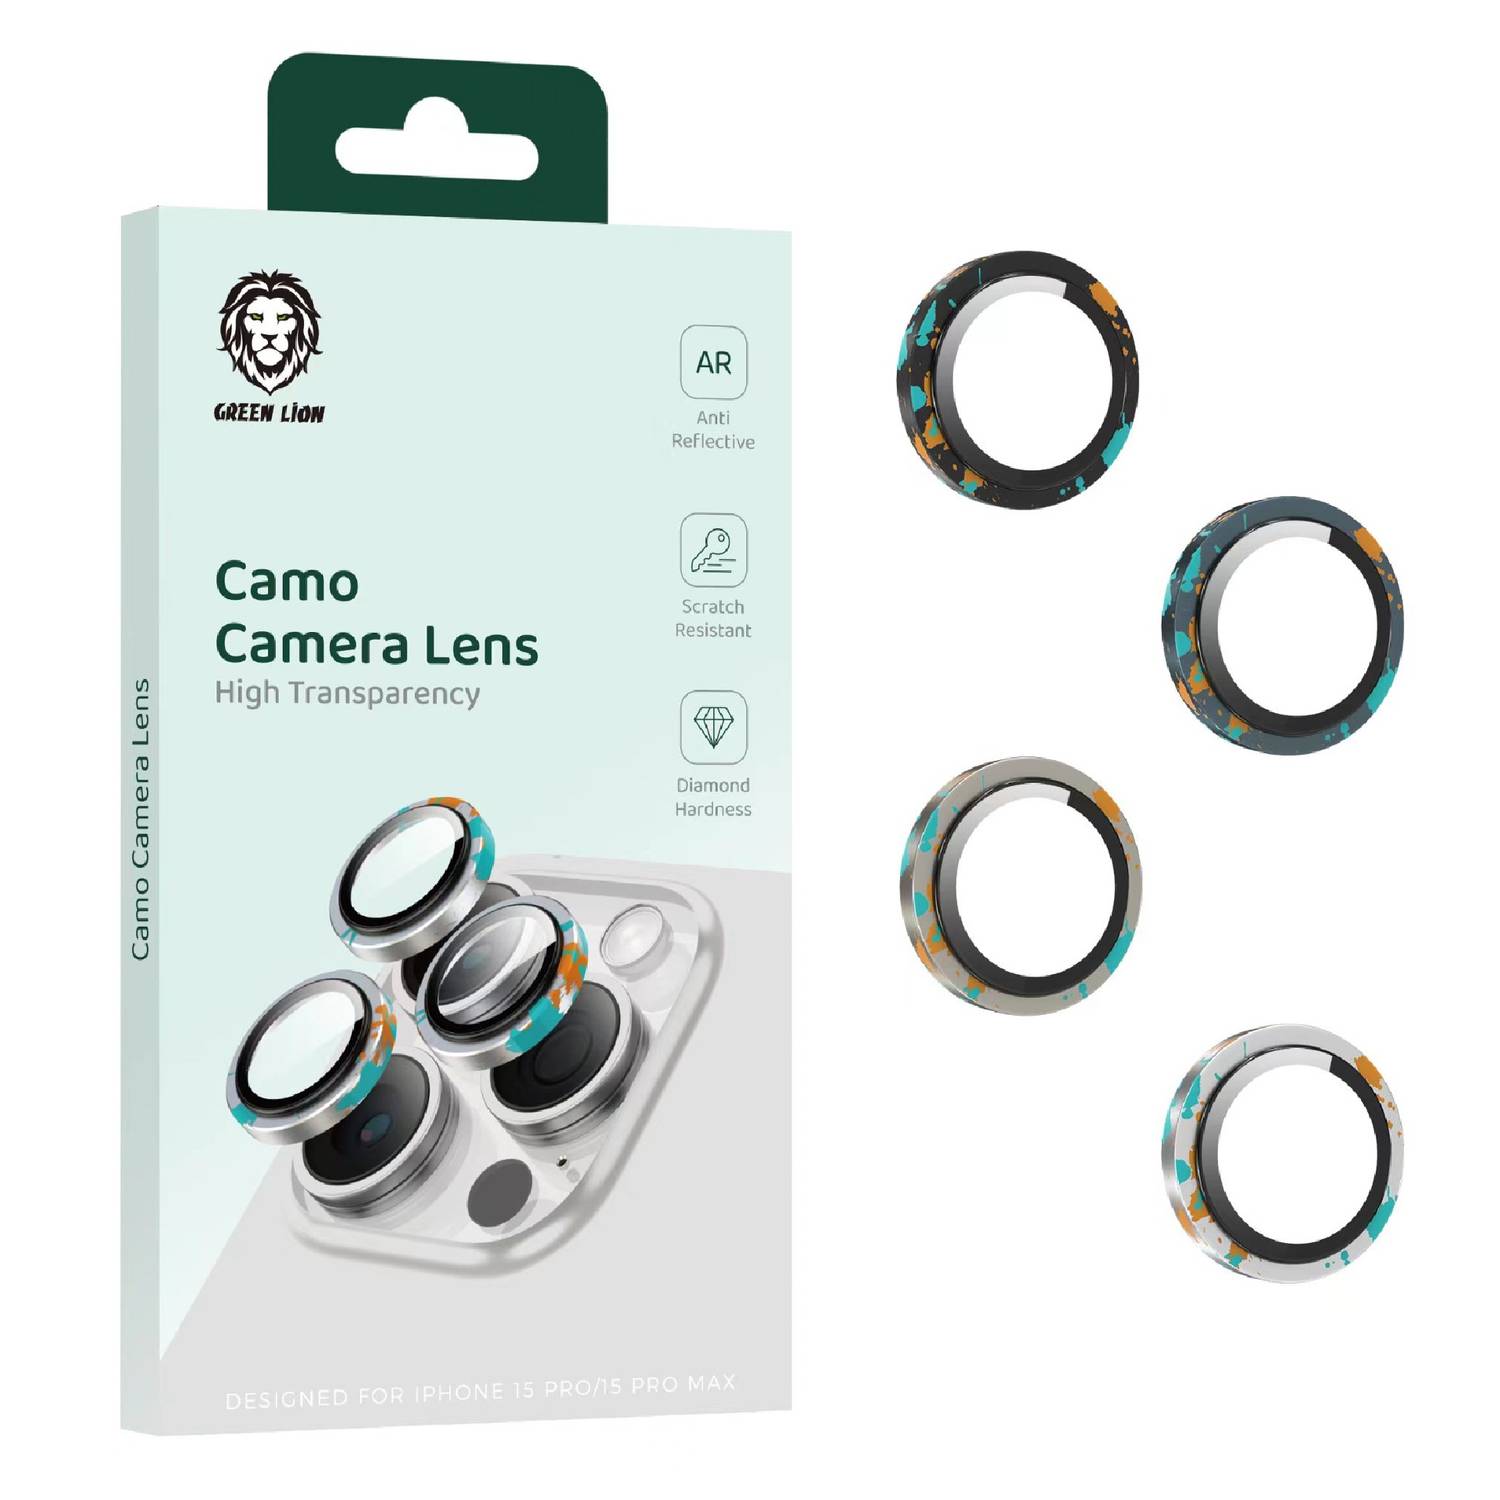 Green Lion Camera Lens for iP15 Pro/Pro Max